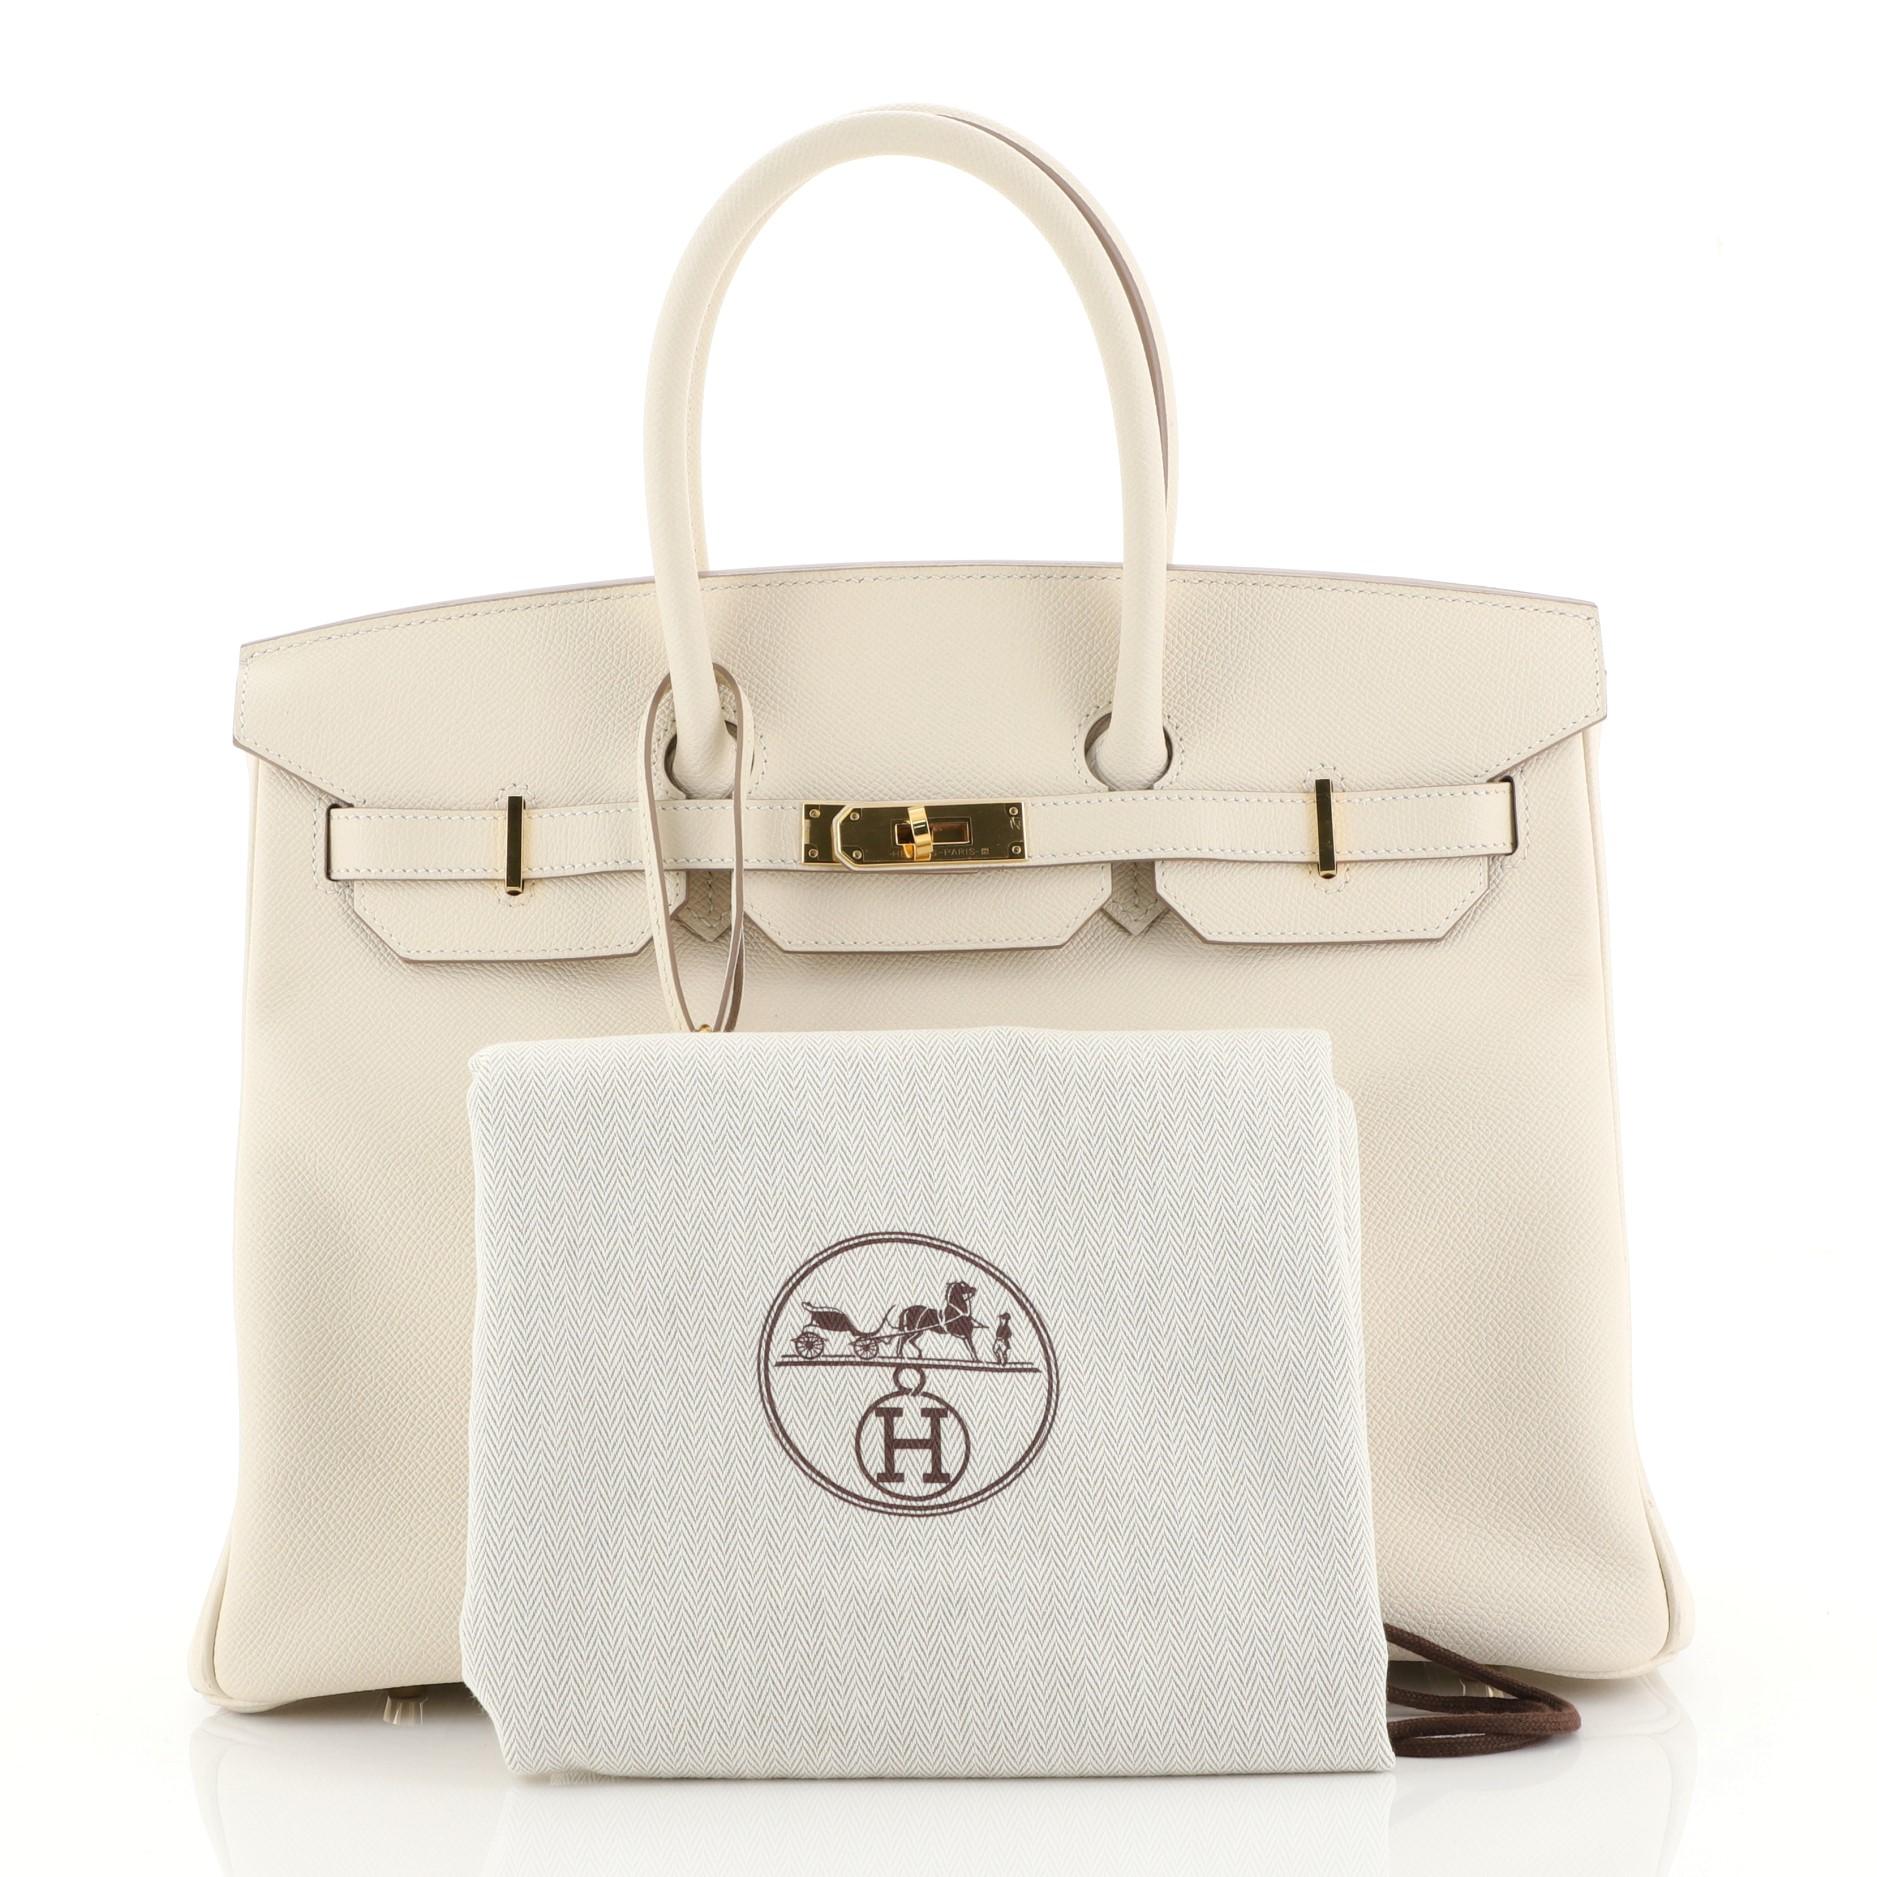 This Hermes Birkin Handbag Craie Epsom with Gold Hardware 35, crafted in Craie white Epsom leather, features dual rolled handles, frontal flap, and gold hardware. Its turn-lock closure opens to a Craie white Chevre leather interior with zip and slip